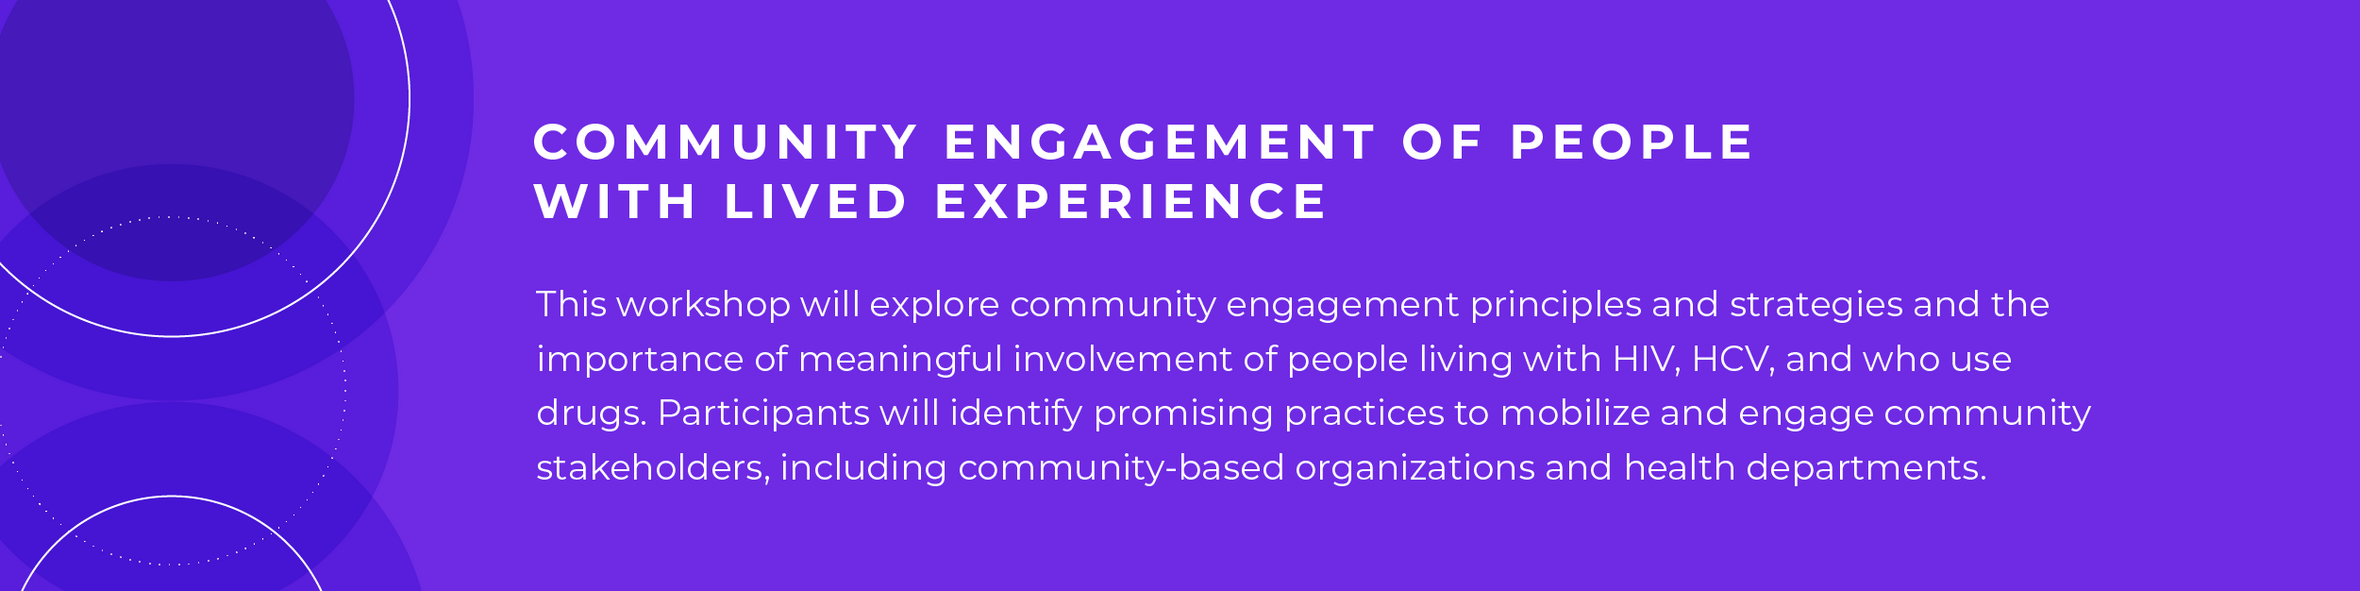 Community Engagement for People with Lived Experiences